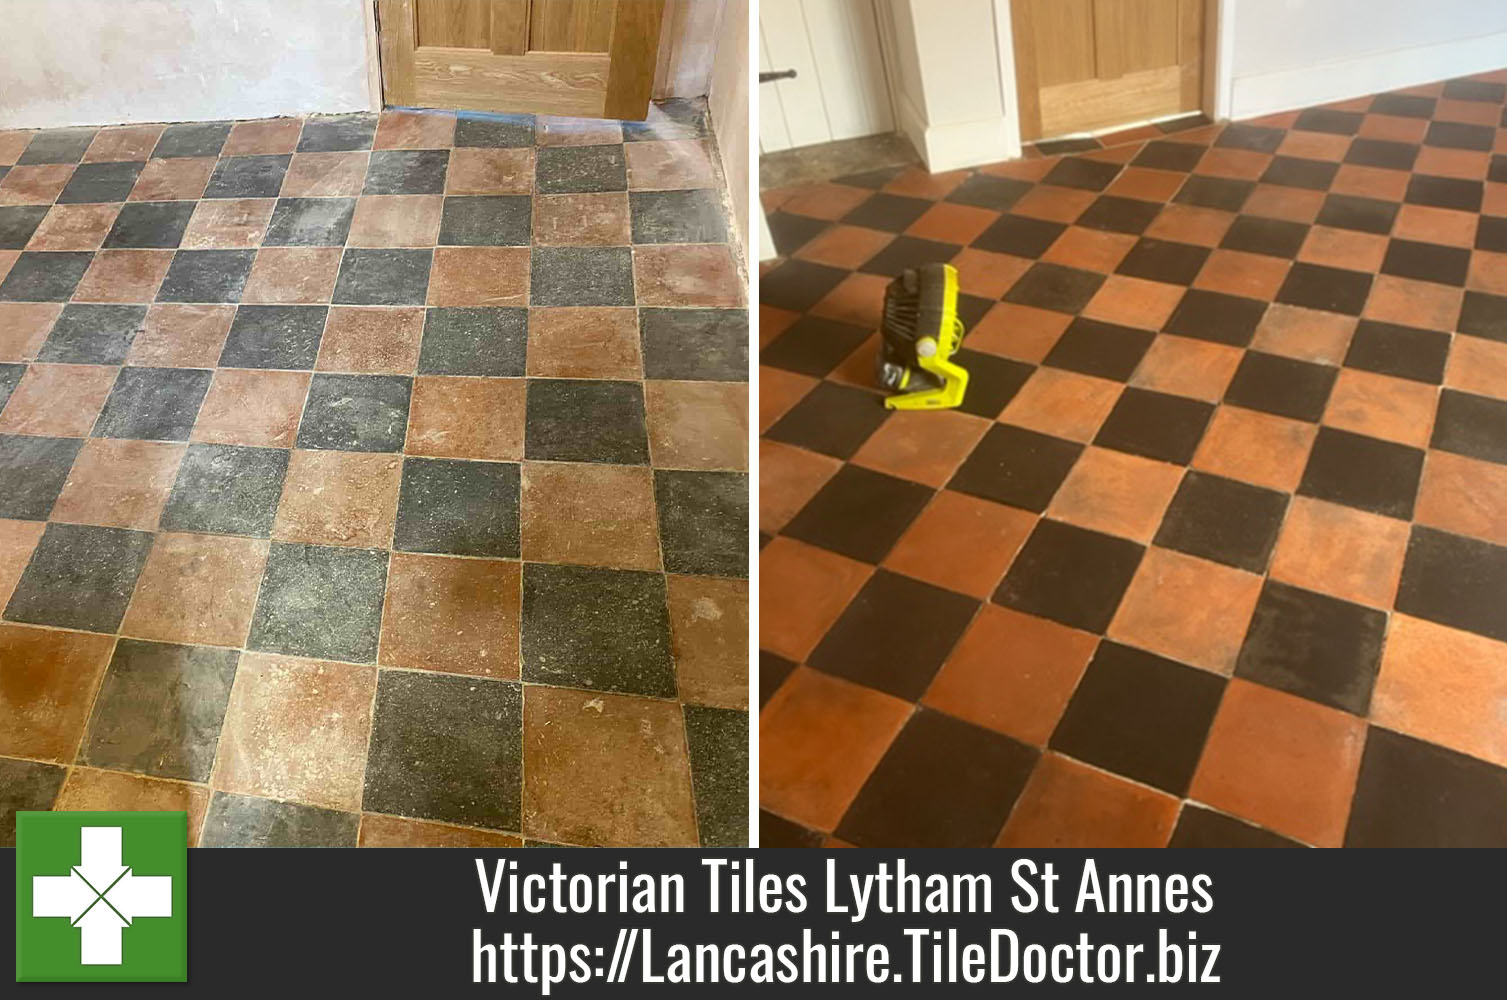 Red and Black Victorian Tiled Floor Renovated in Lytham St Annes Lancashire